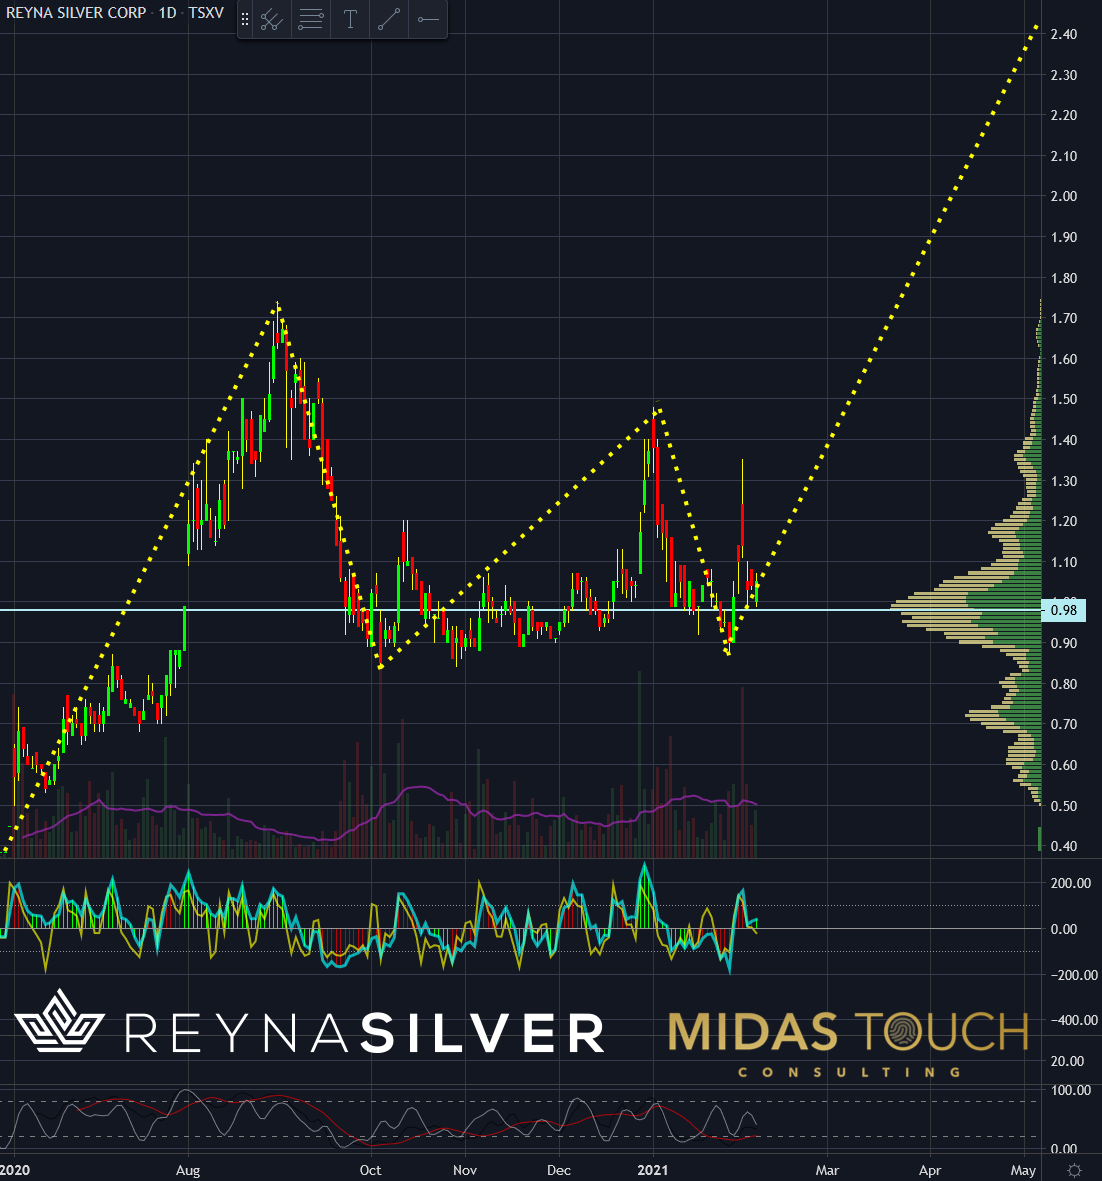 Reyna Silver Corp in Canadian Dollar, daily chart as of February 4th, 2021.